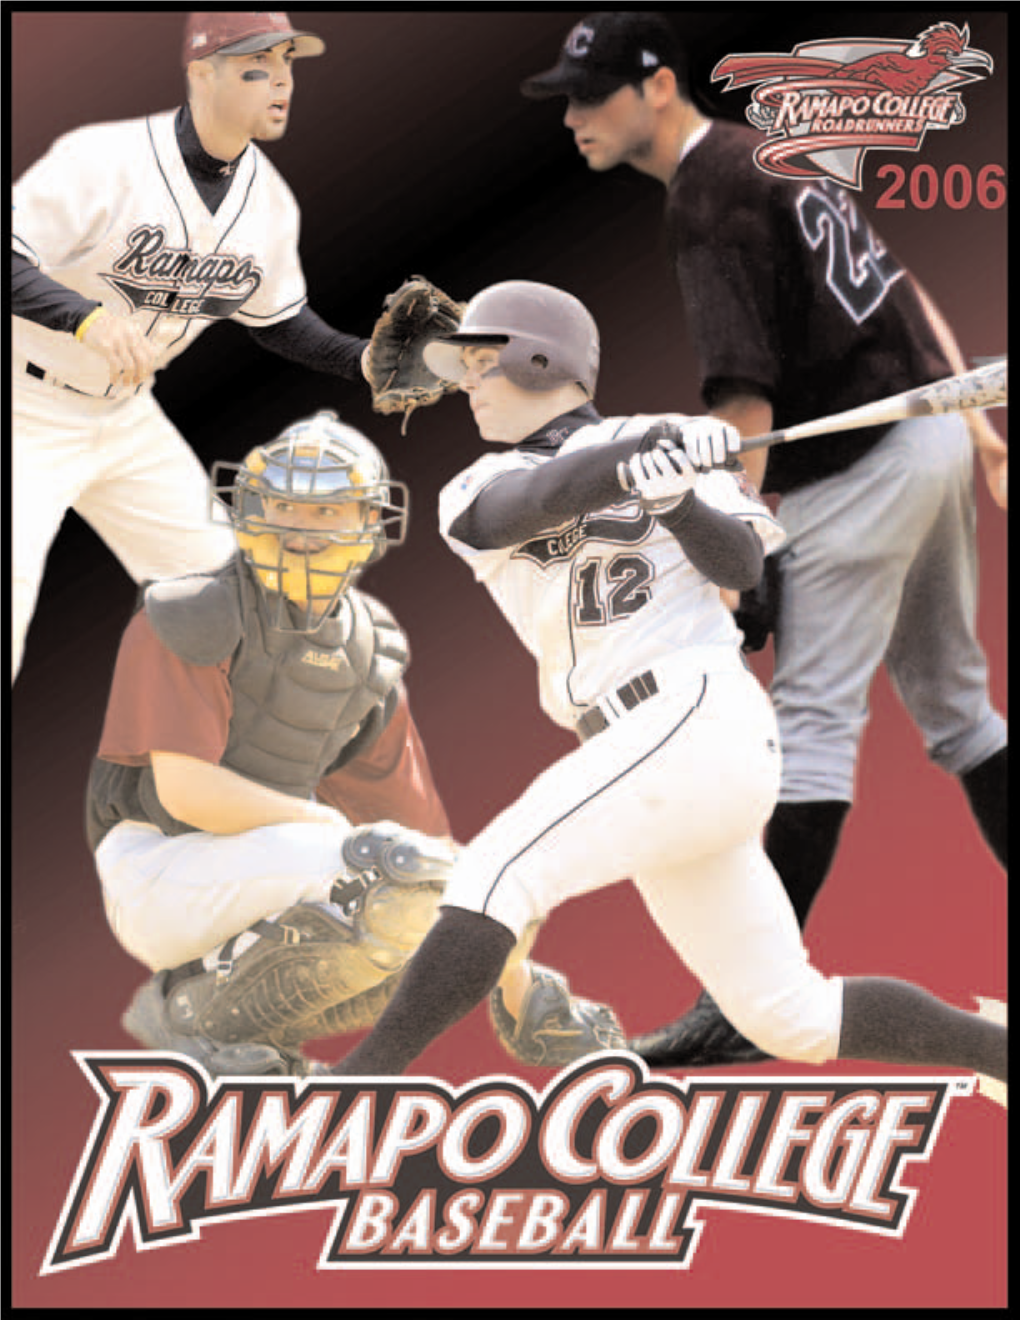 2006 RAMAPO COLLEGE BASEBALL TEAM Best Wishes for A